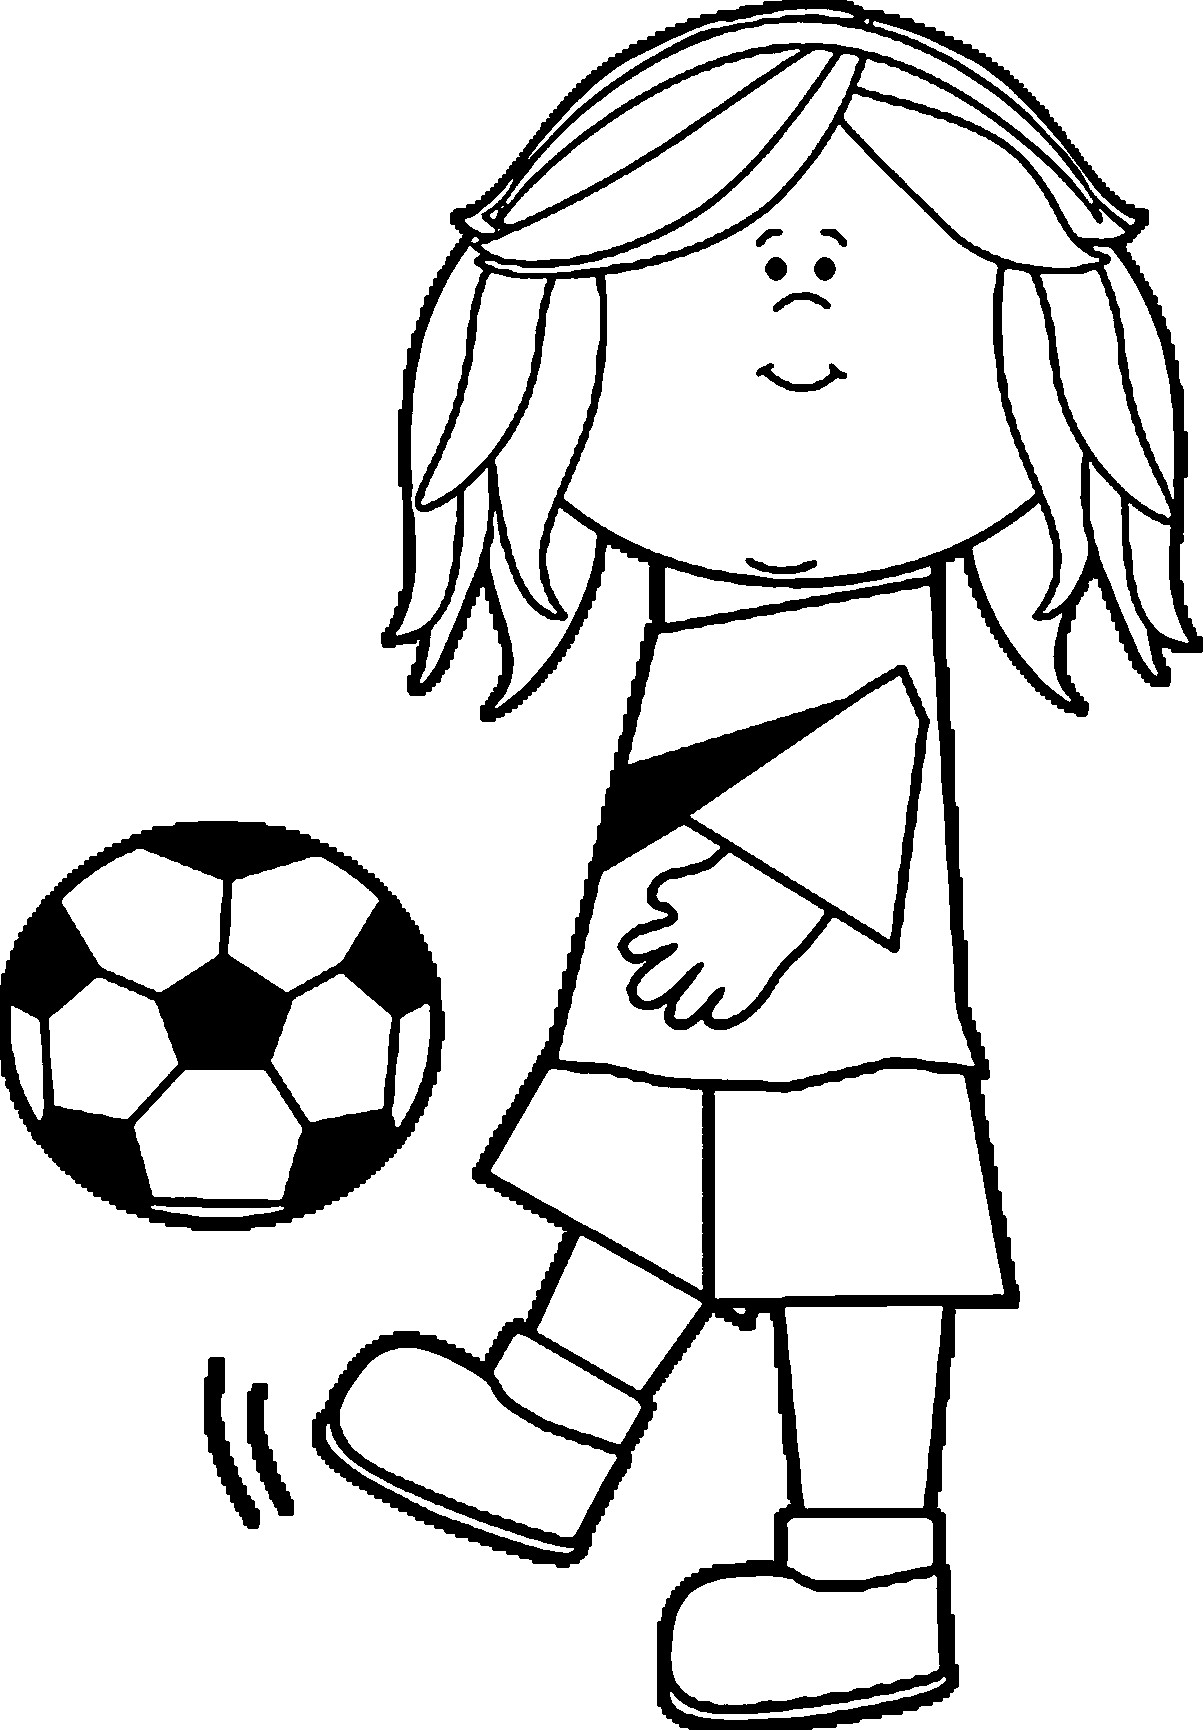 Girl Soccer Coloring Pages
 Soccer Girl Playing Football Coloring Page